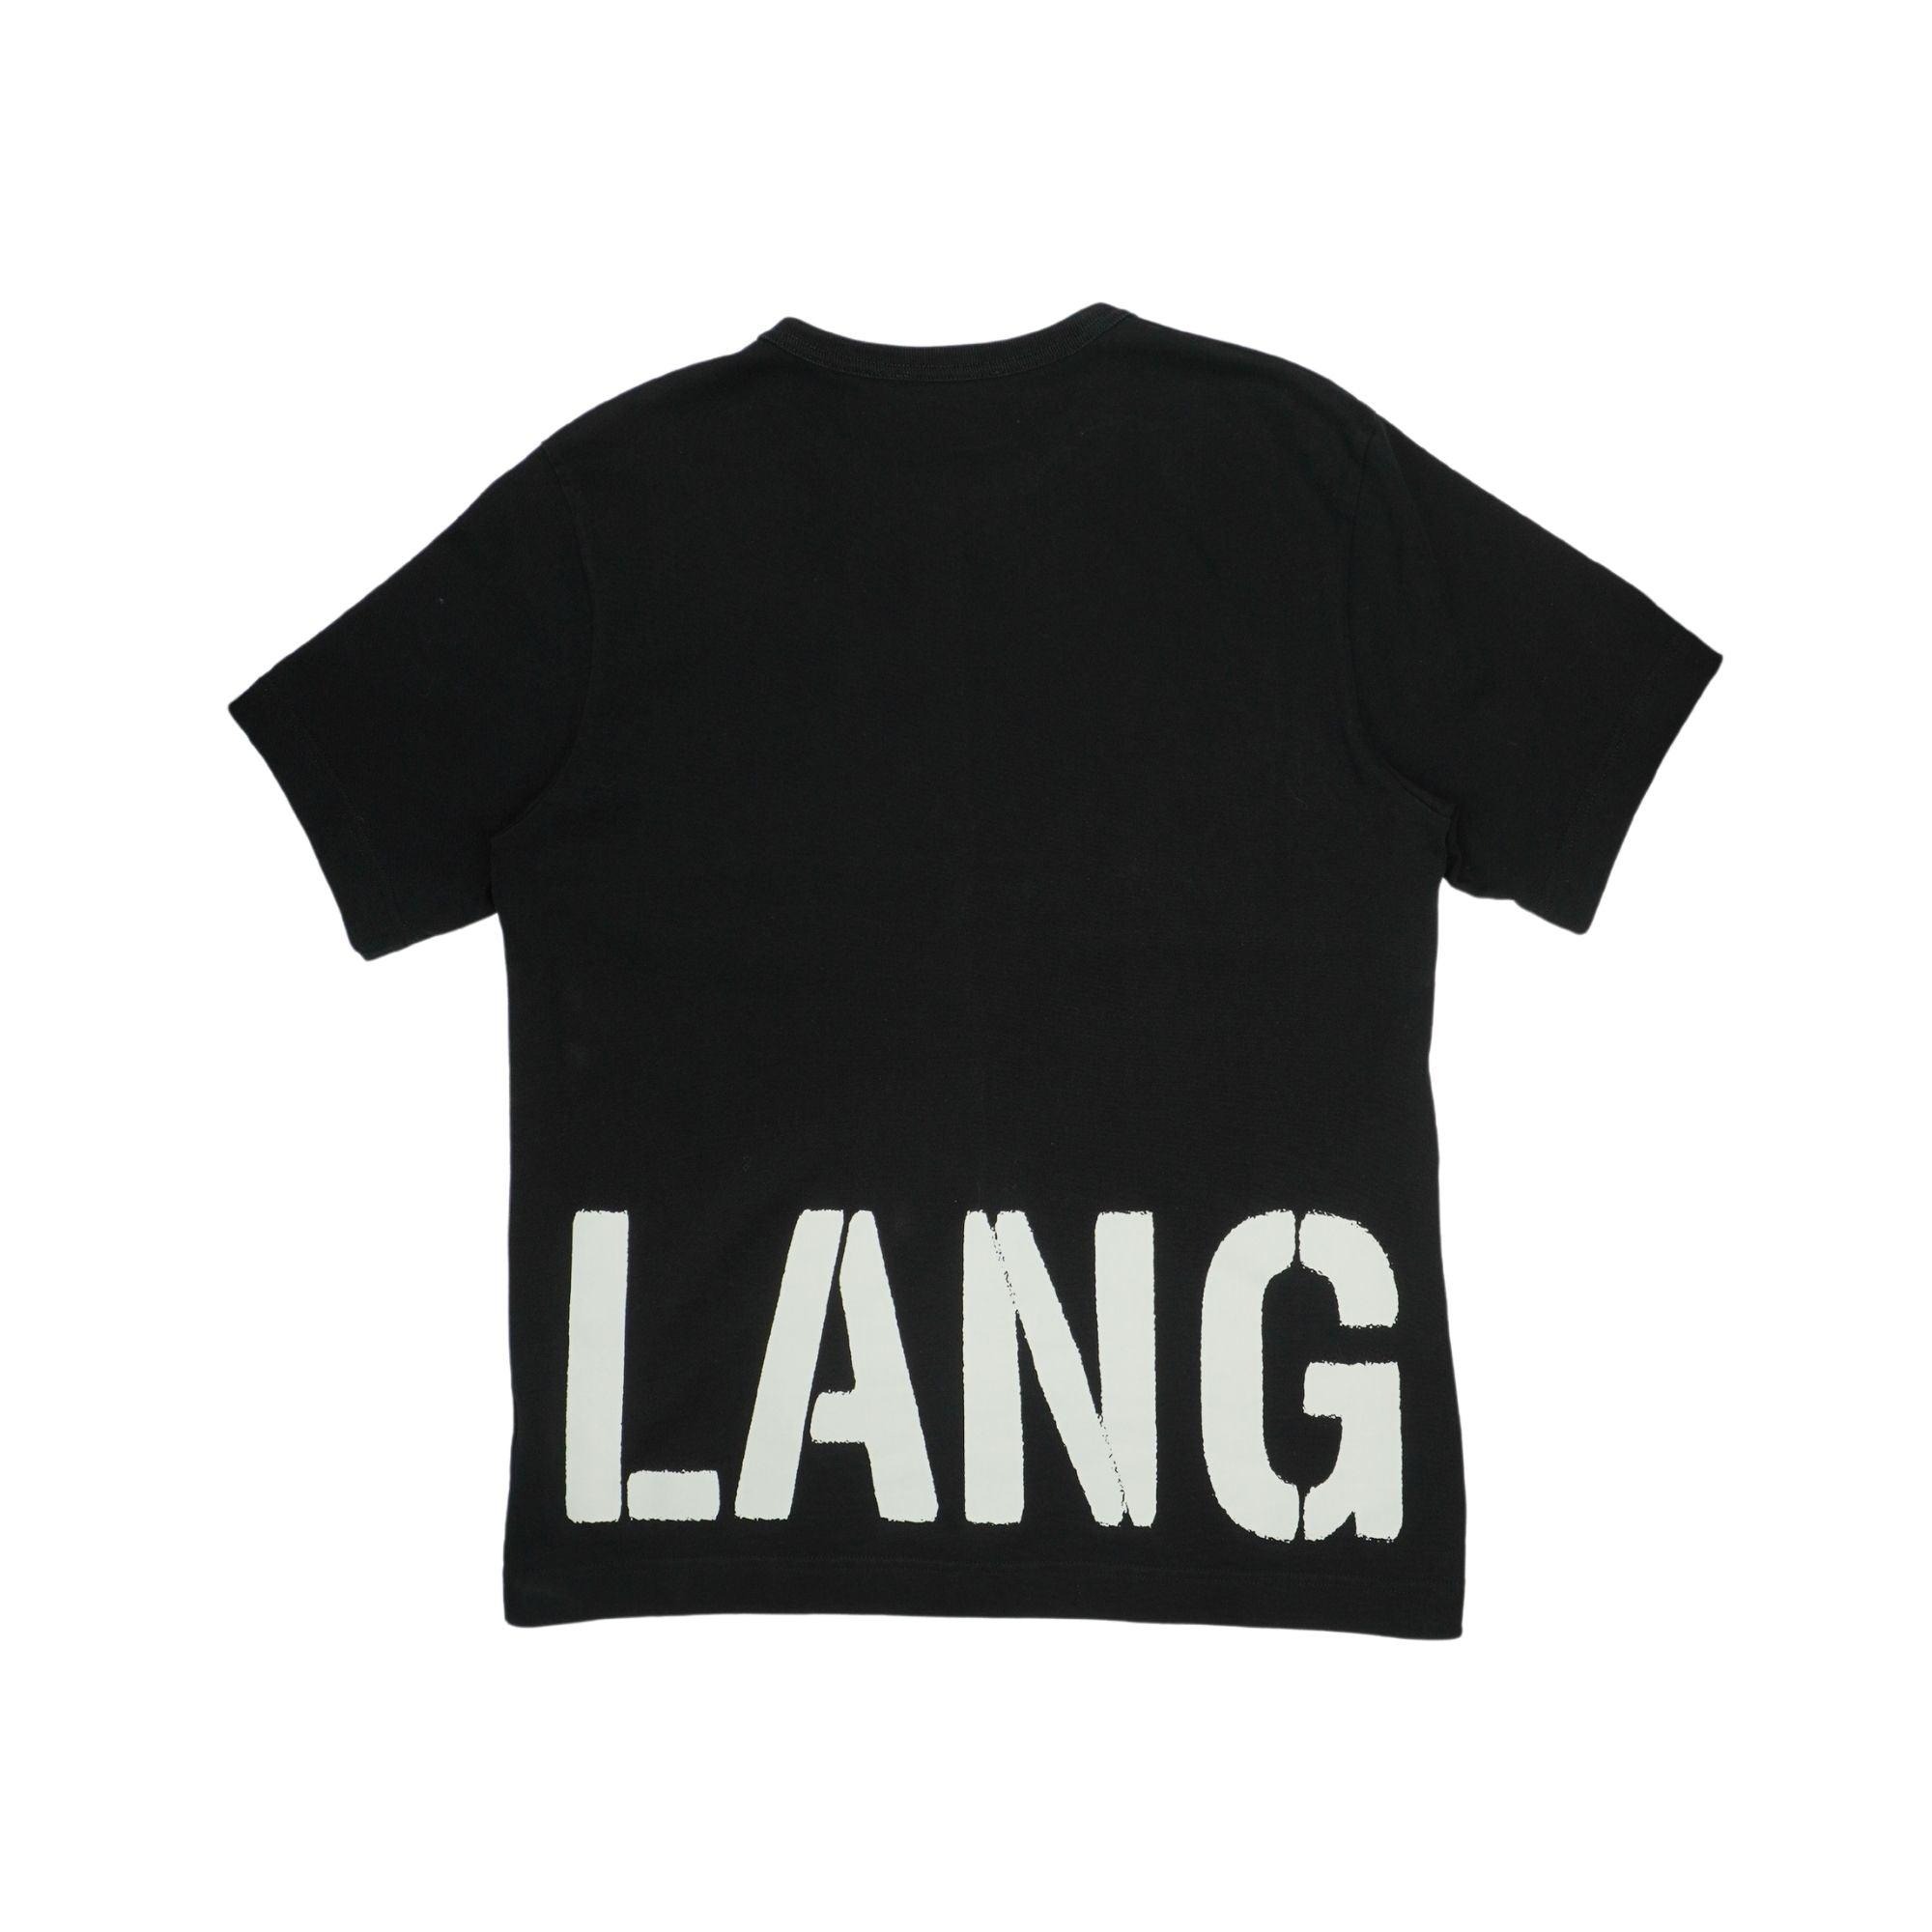 Helmut Lang T-Shirt - Men's M - Fashionably Yours